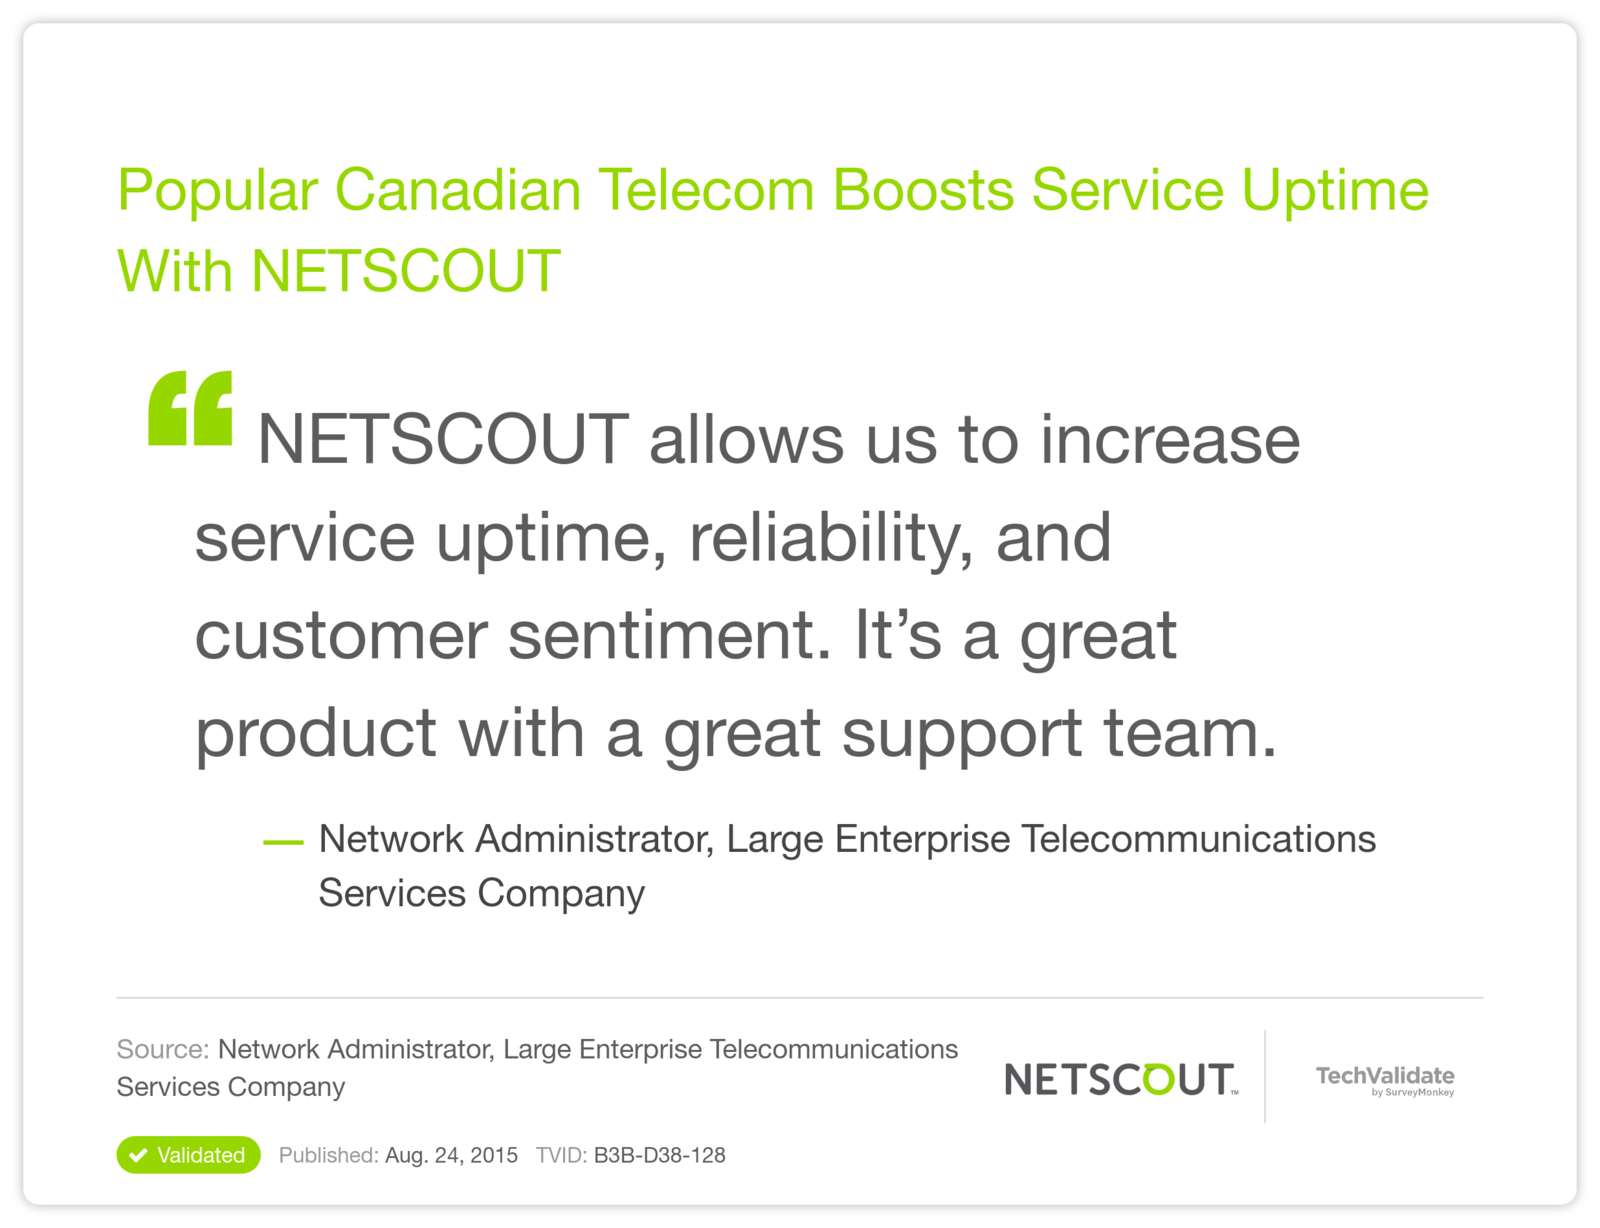 Popular Canadian Telecom Boosts Service Uptime With NETSCOUT